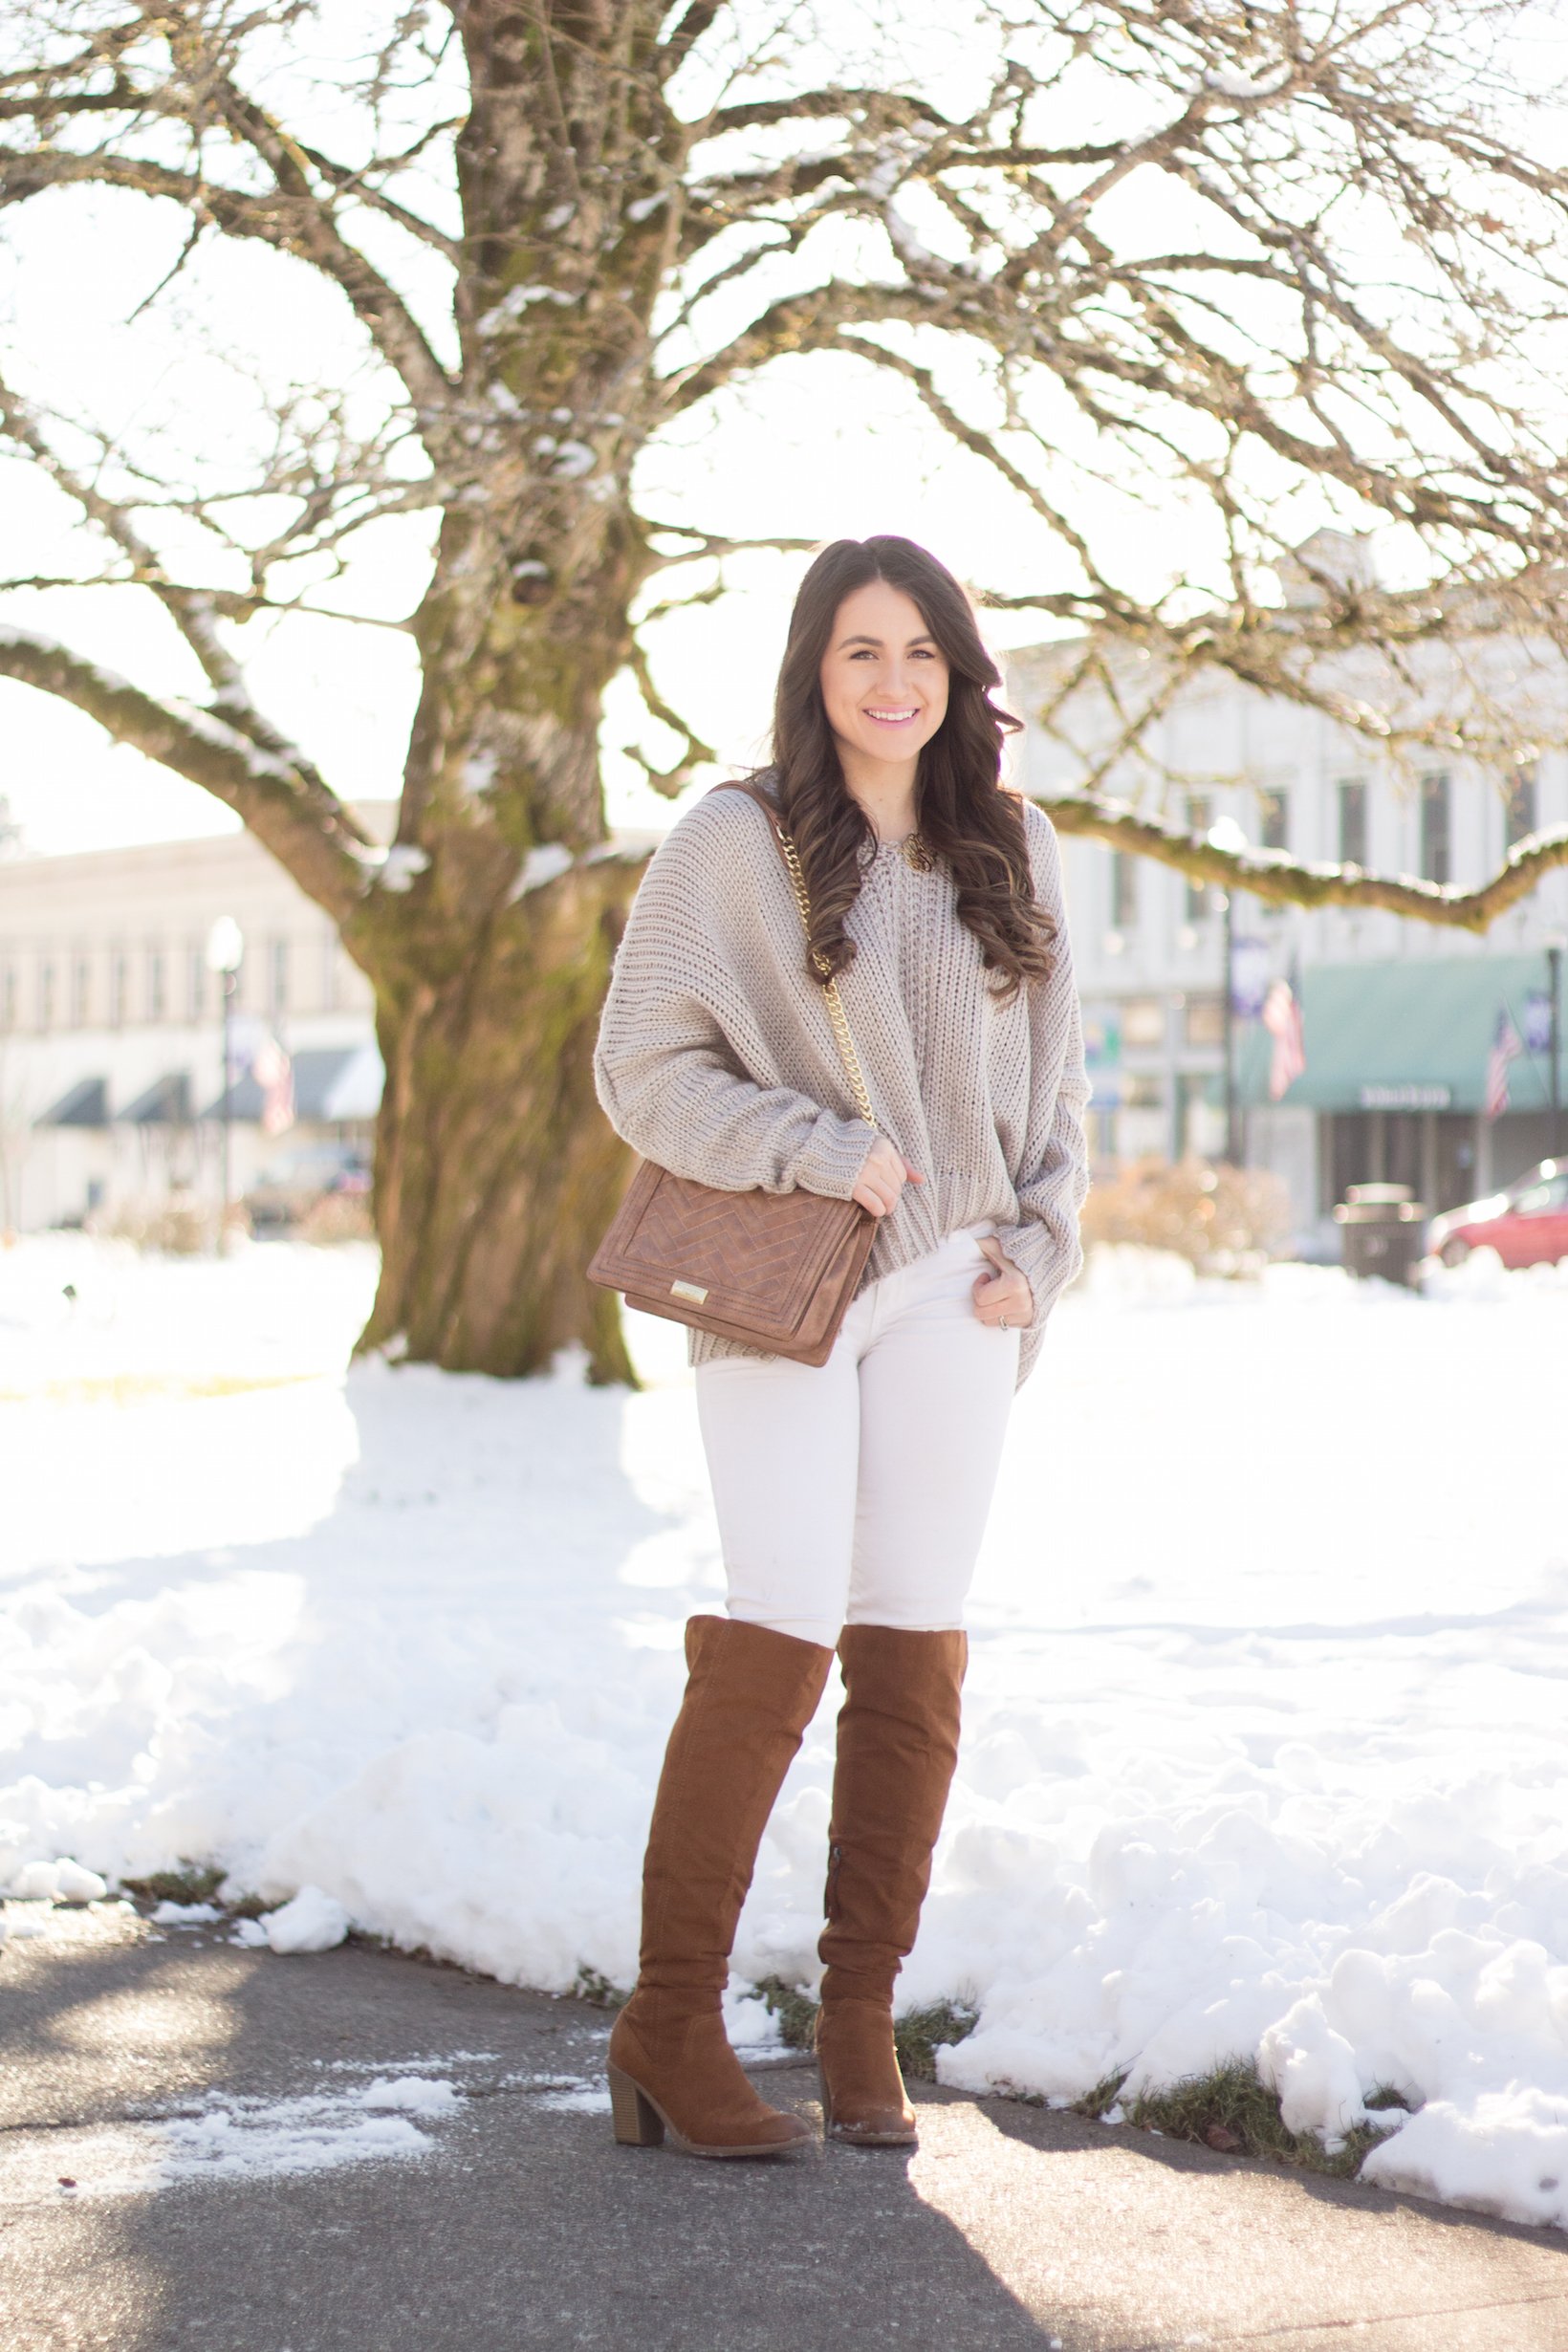 The perfect Winter look in this oversized grey sweater and over the knee boots. 